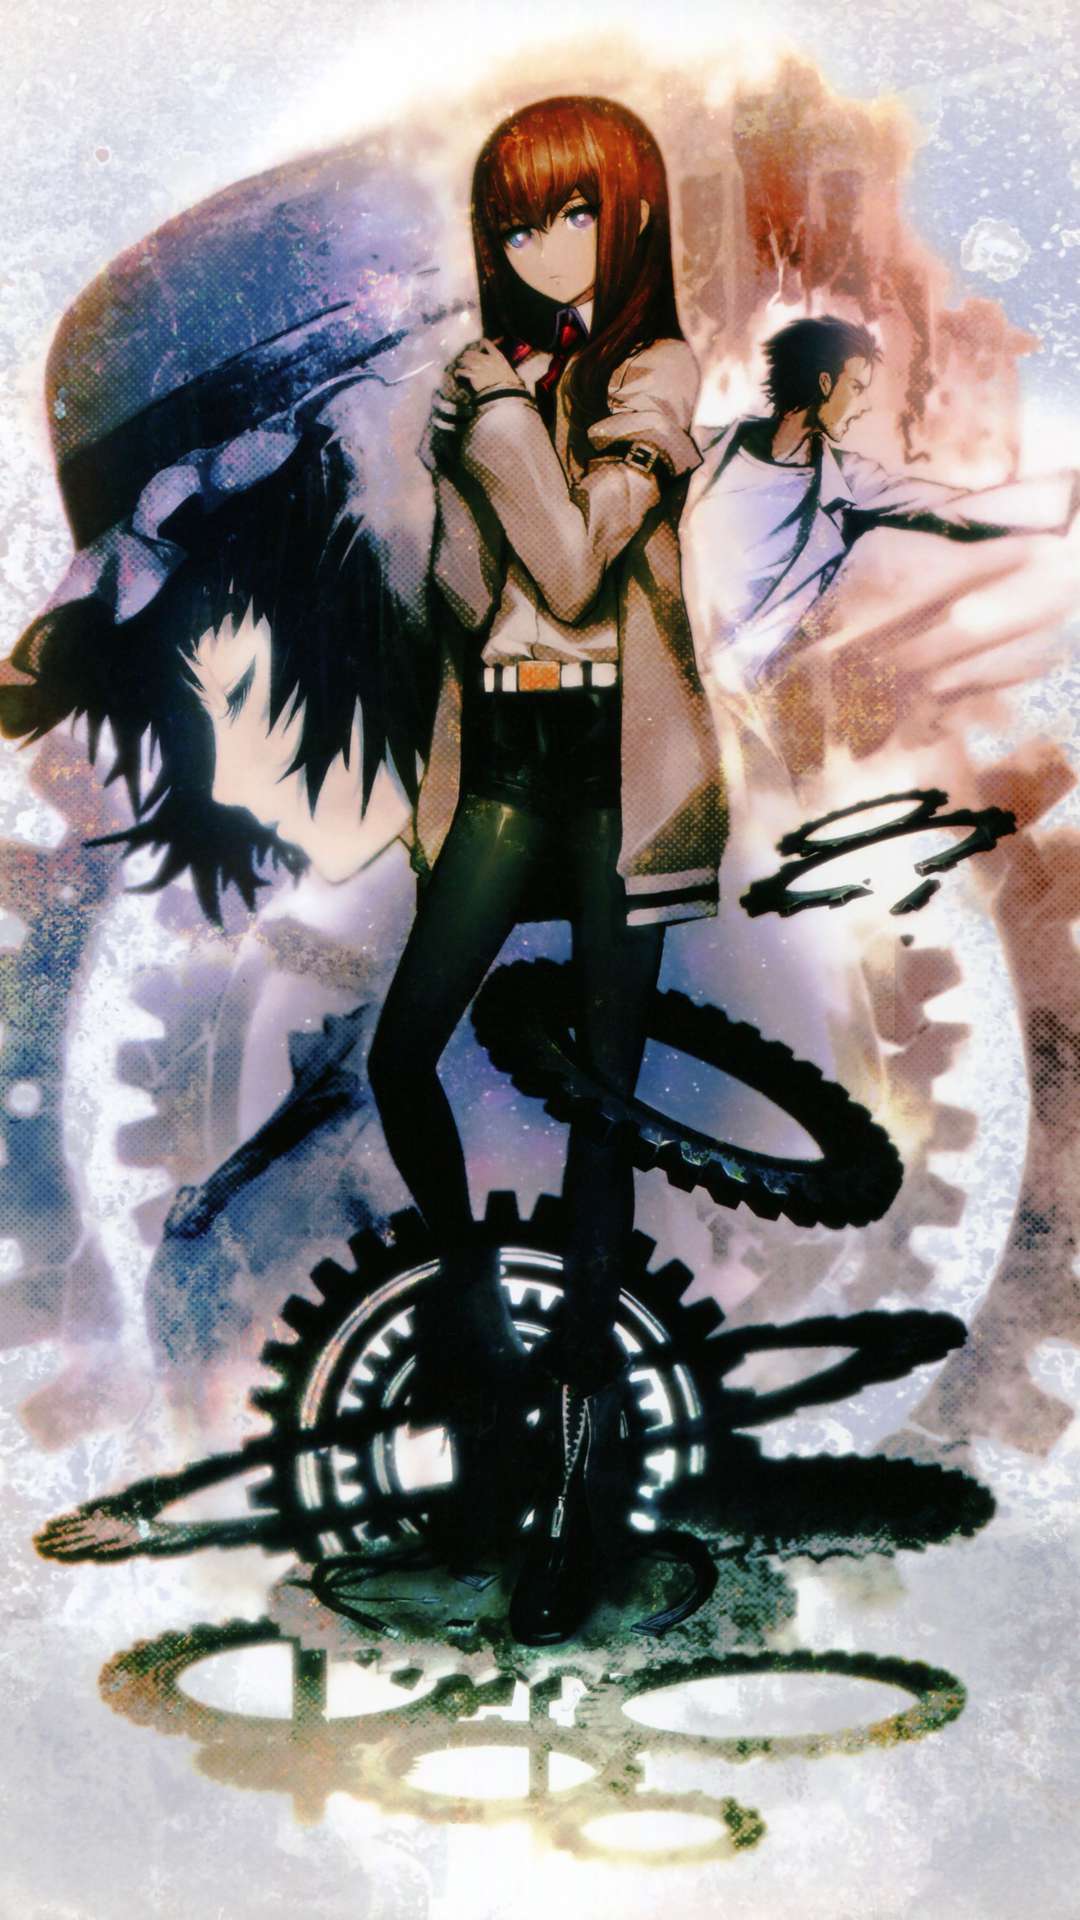 24 Steins Gate Wallpapers For Iphone And Android By Christian Fuller